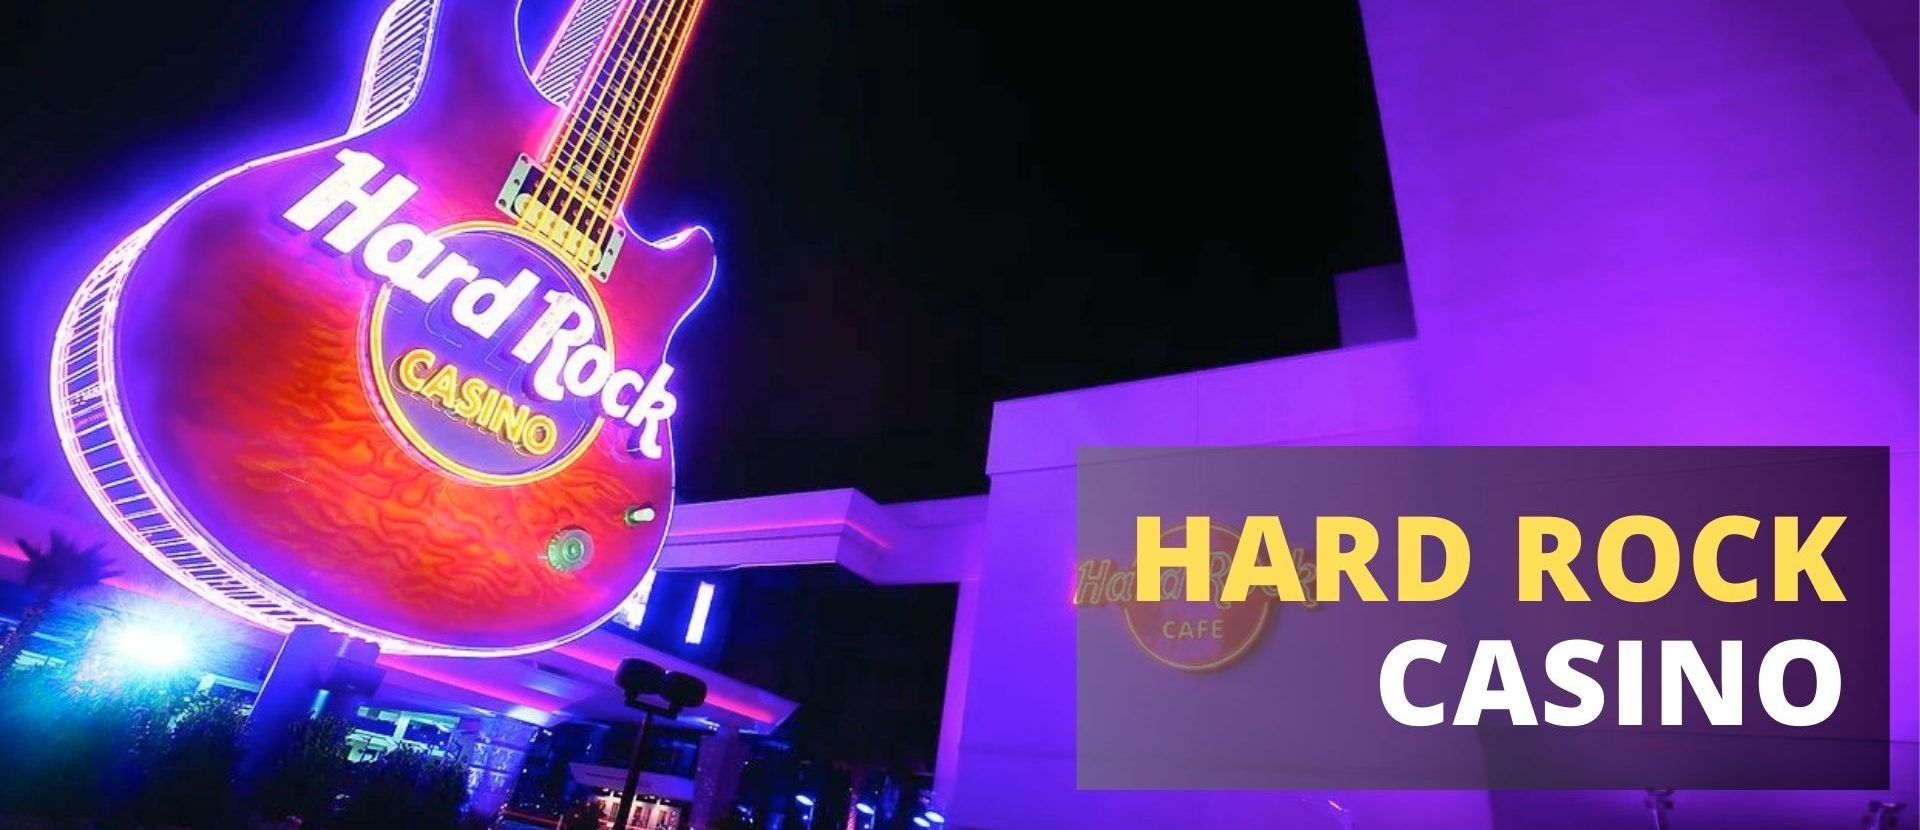 Hard Rock Casino: A Legendary Gaming Destination with Amazing Bonuses and Promotions